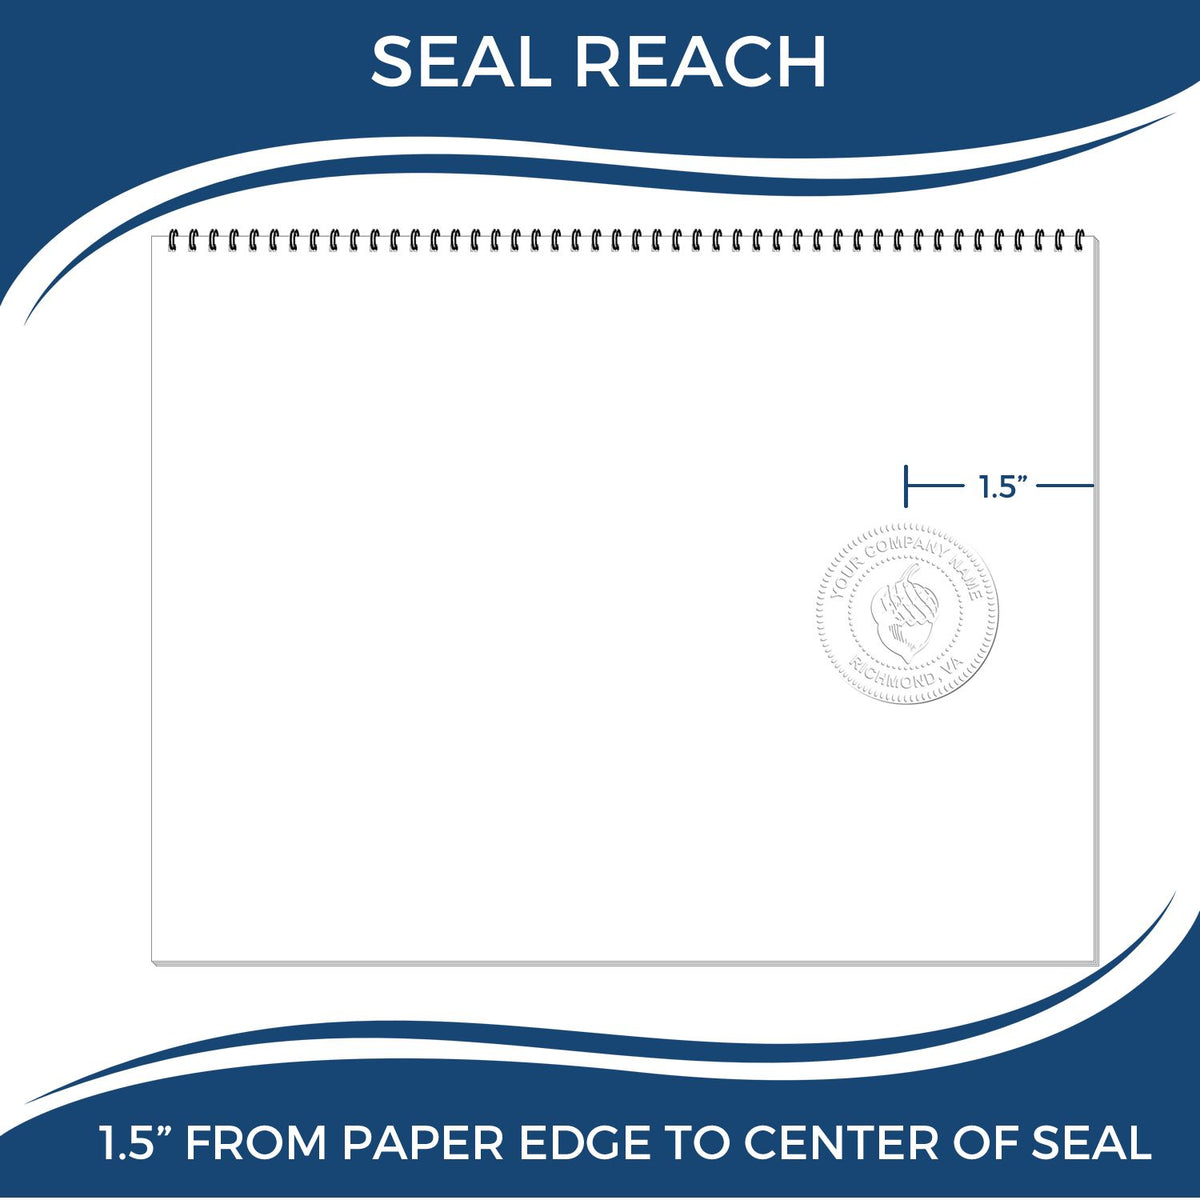 An infographic showing the seal reach which is represented by a ruler and a miniature seal image of the Georgia Engineer Desk Seal